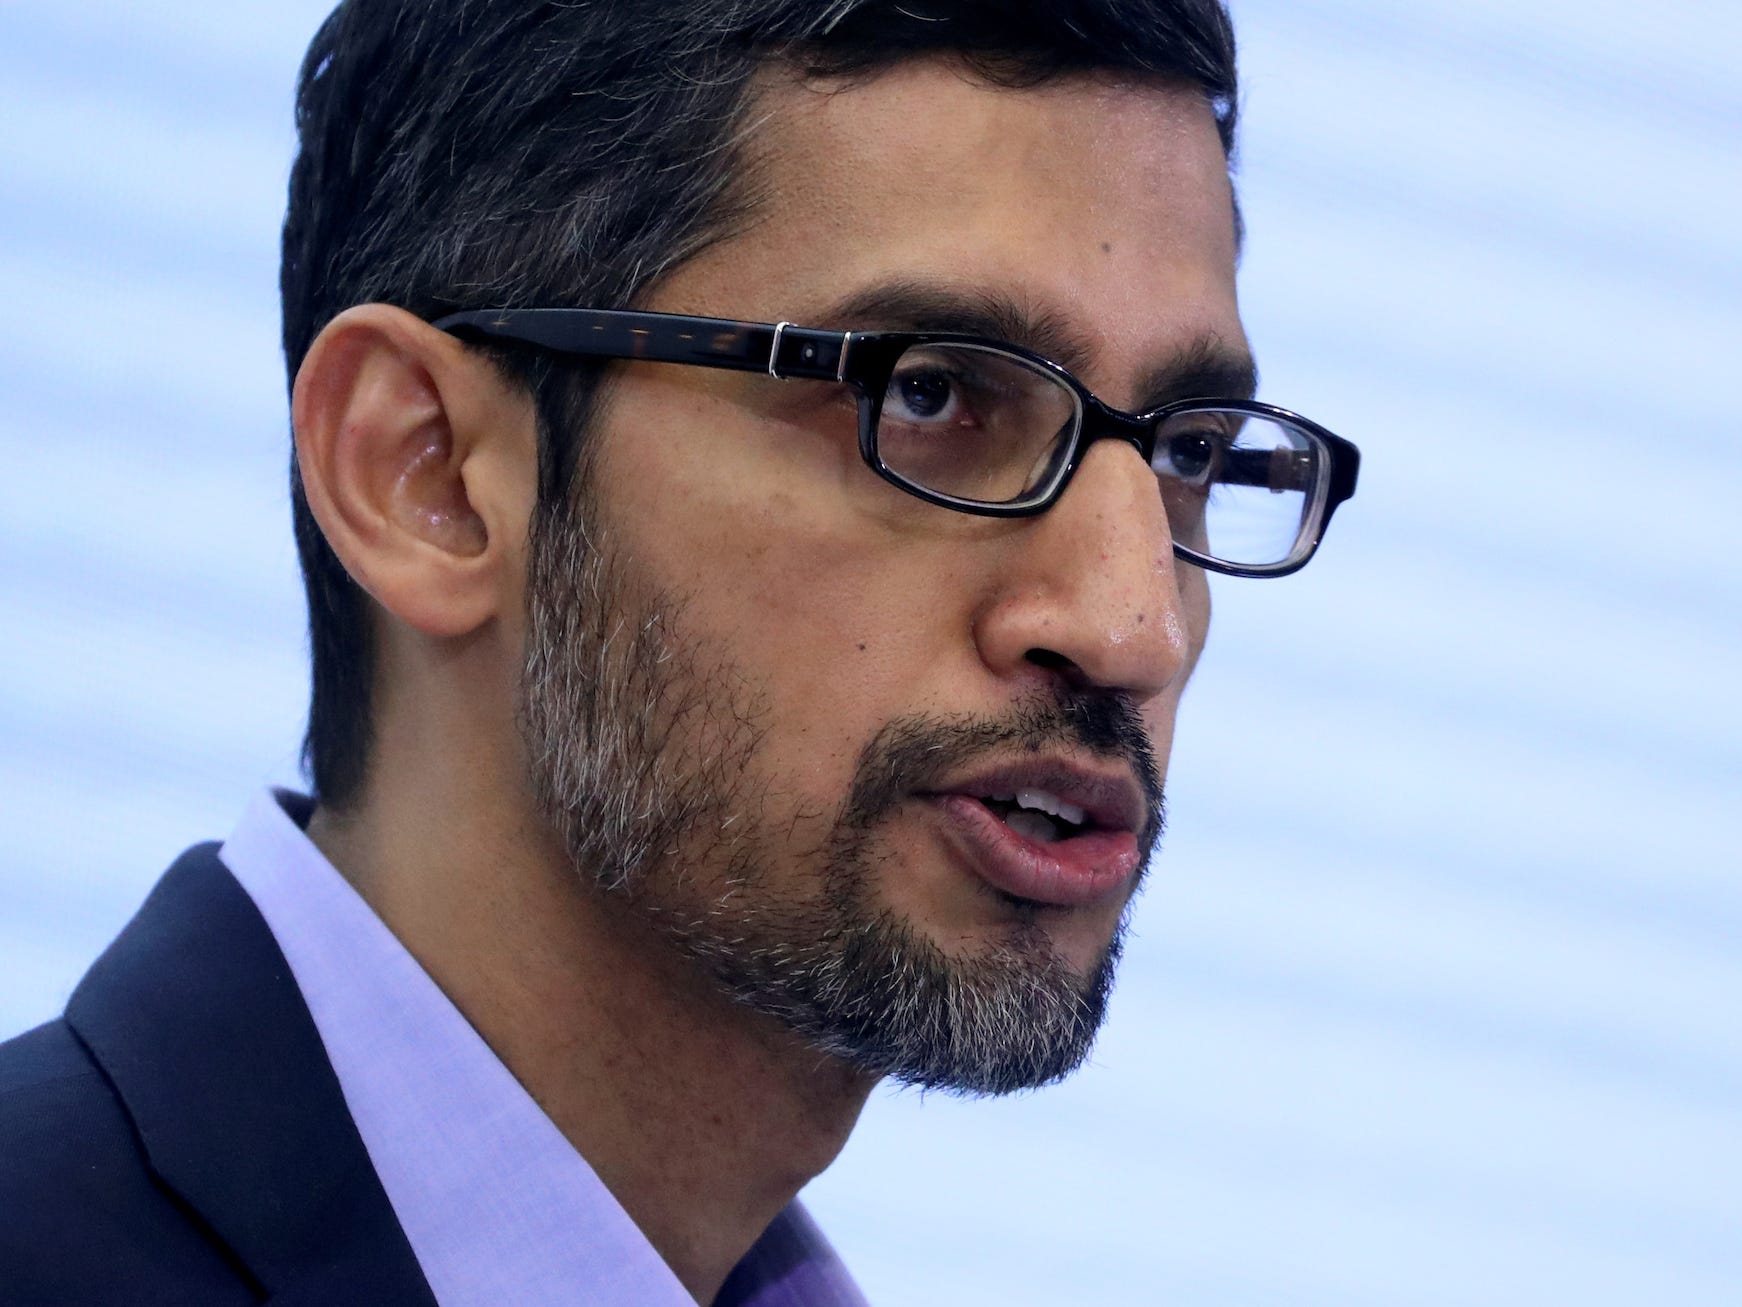 Sundar Pichai, CEO of Google and Alphabet, speaks on artificial intelligence during a Bruegel think tank conference in Brussels, Belgium January 20, 2020.